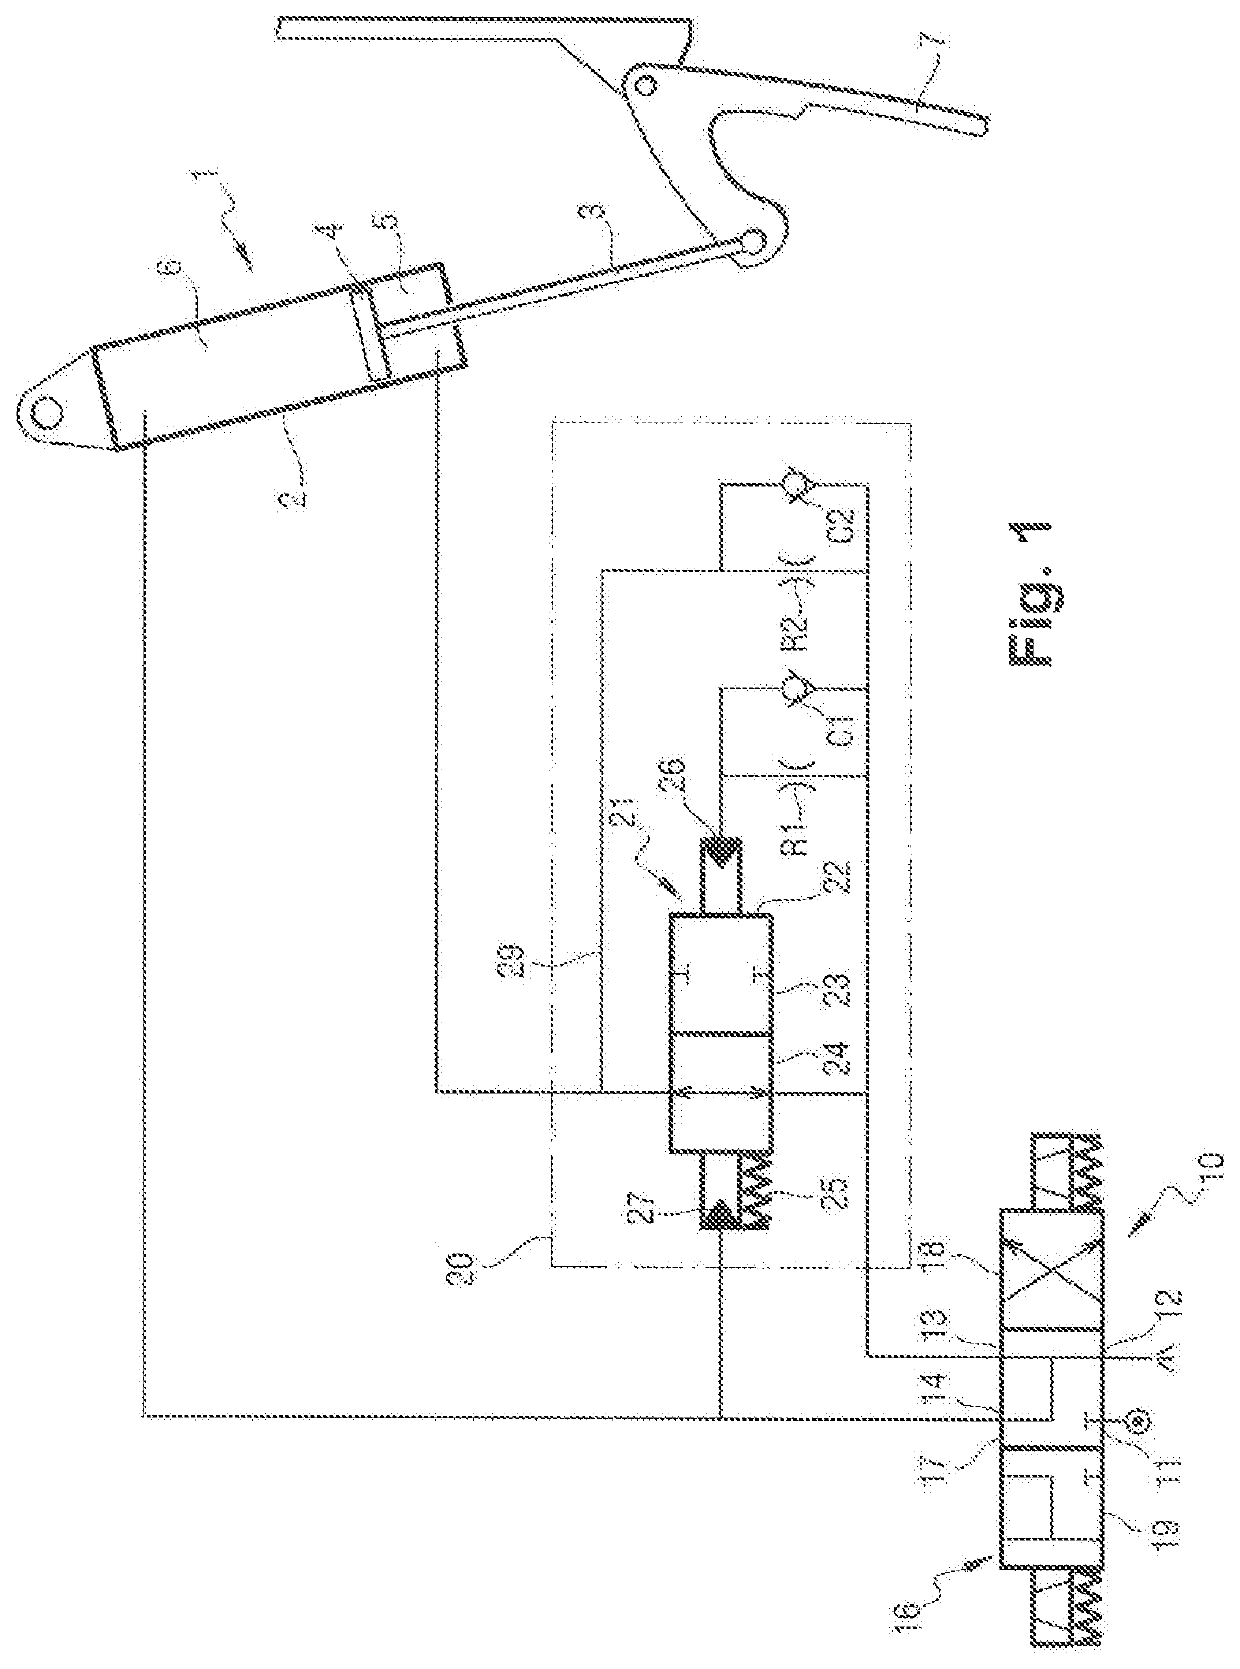 Hydraulic circuit for feeding an actuator, in particular for use in moving a door of an aircraft bay